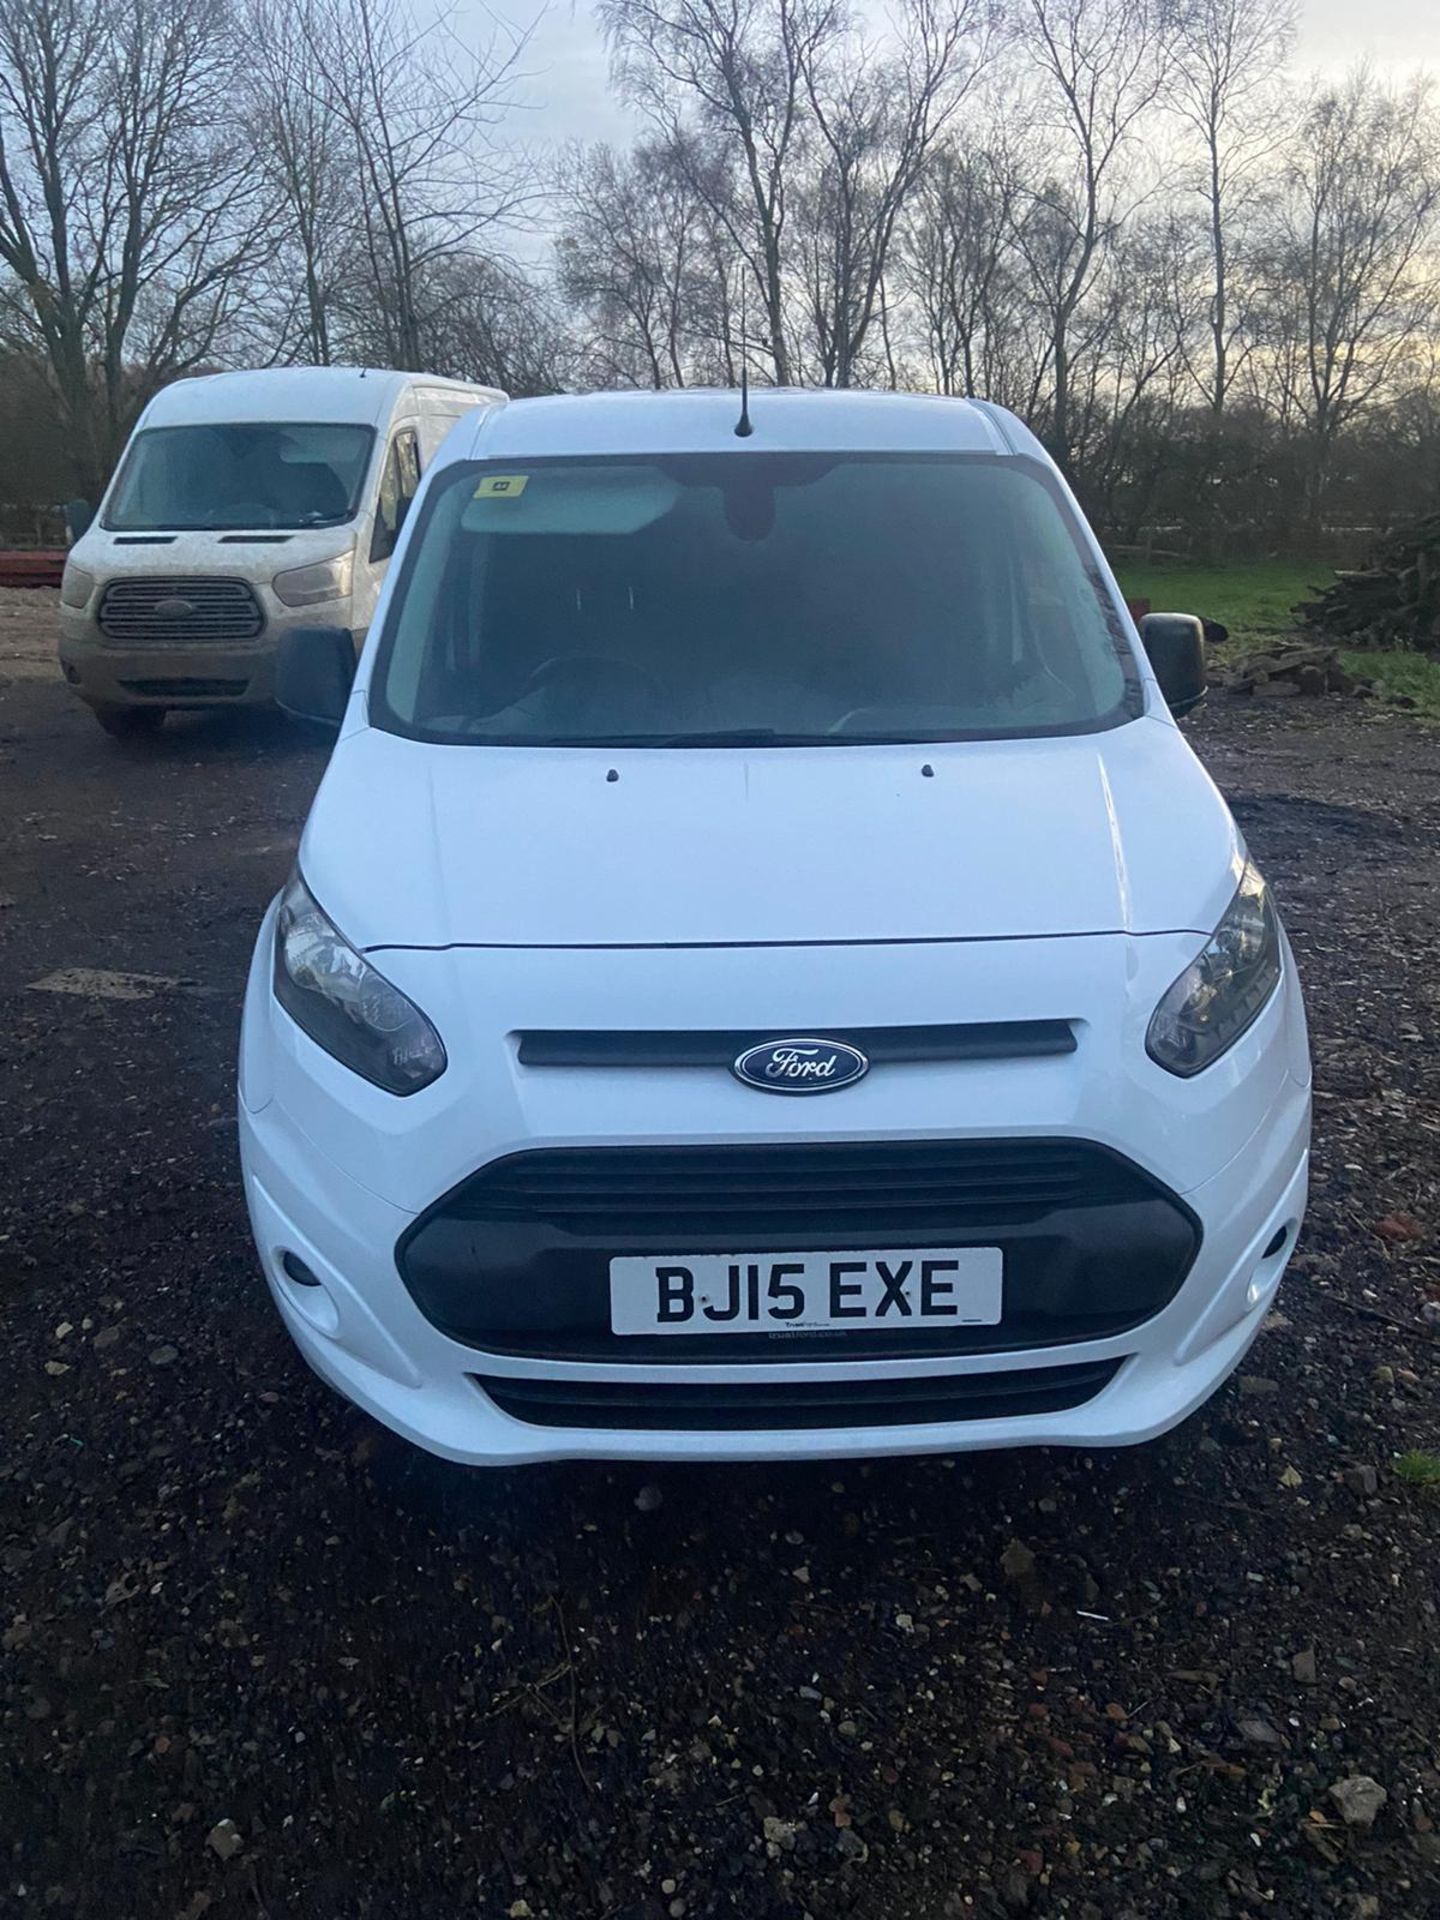 2015/15 REG FORD TRANSIT CONNECT 210 TREND 1.6 DIESEL WHITE PANEL VAN, SHOWING 1 FORMER KEEPER - Image 2 of 10